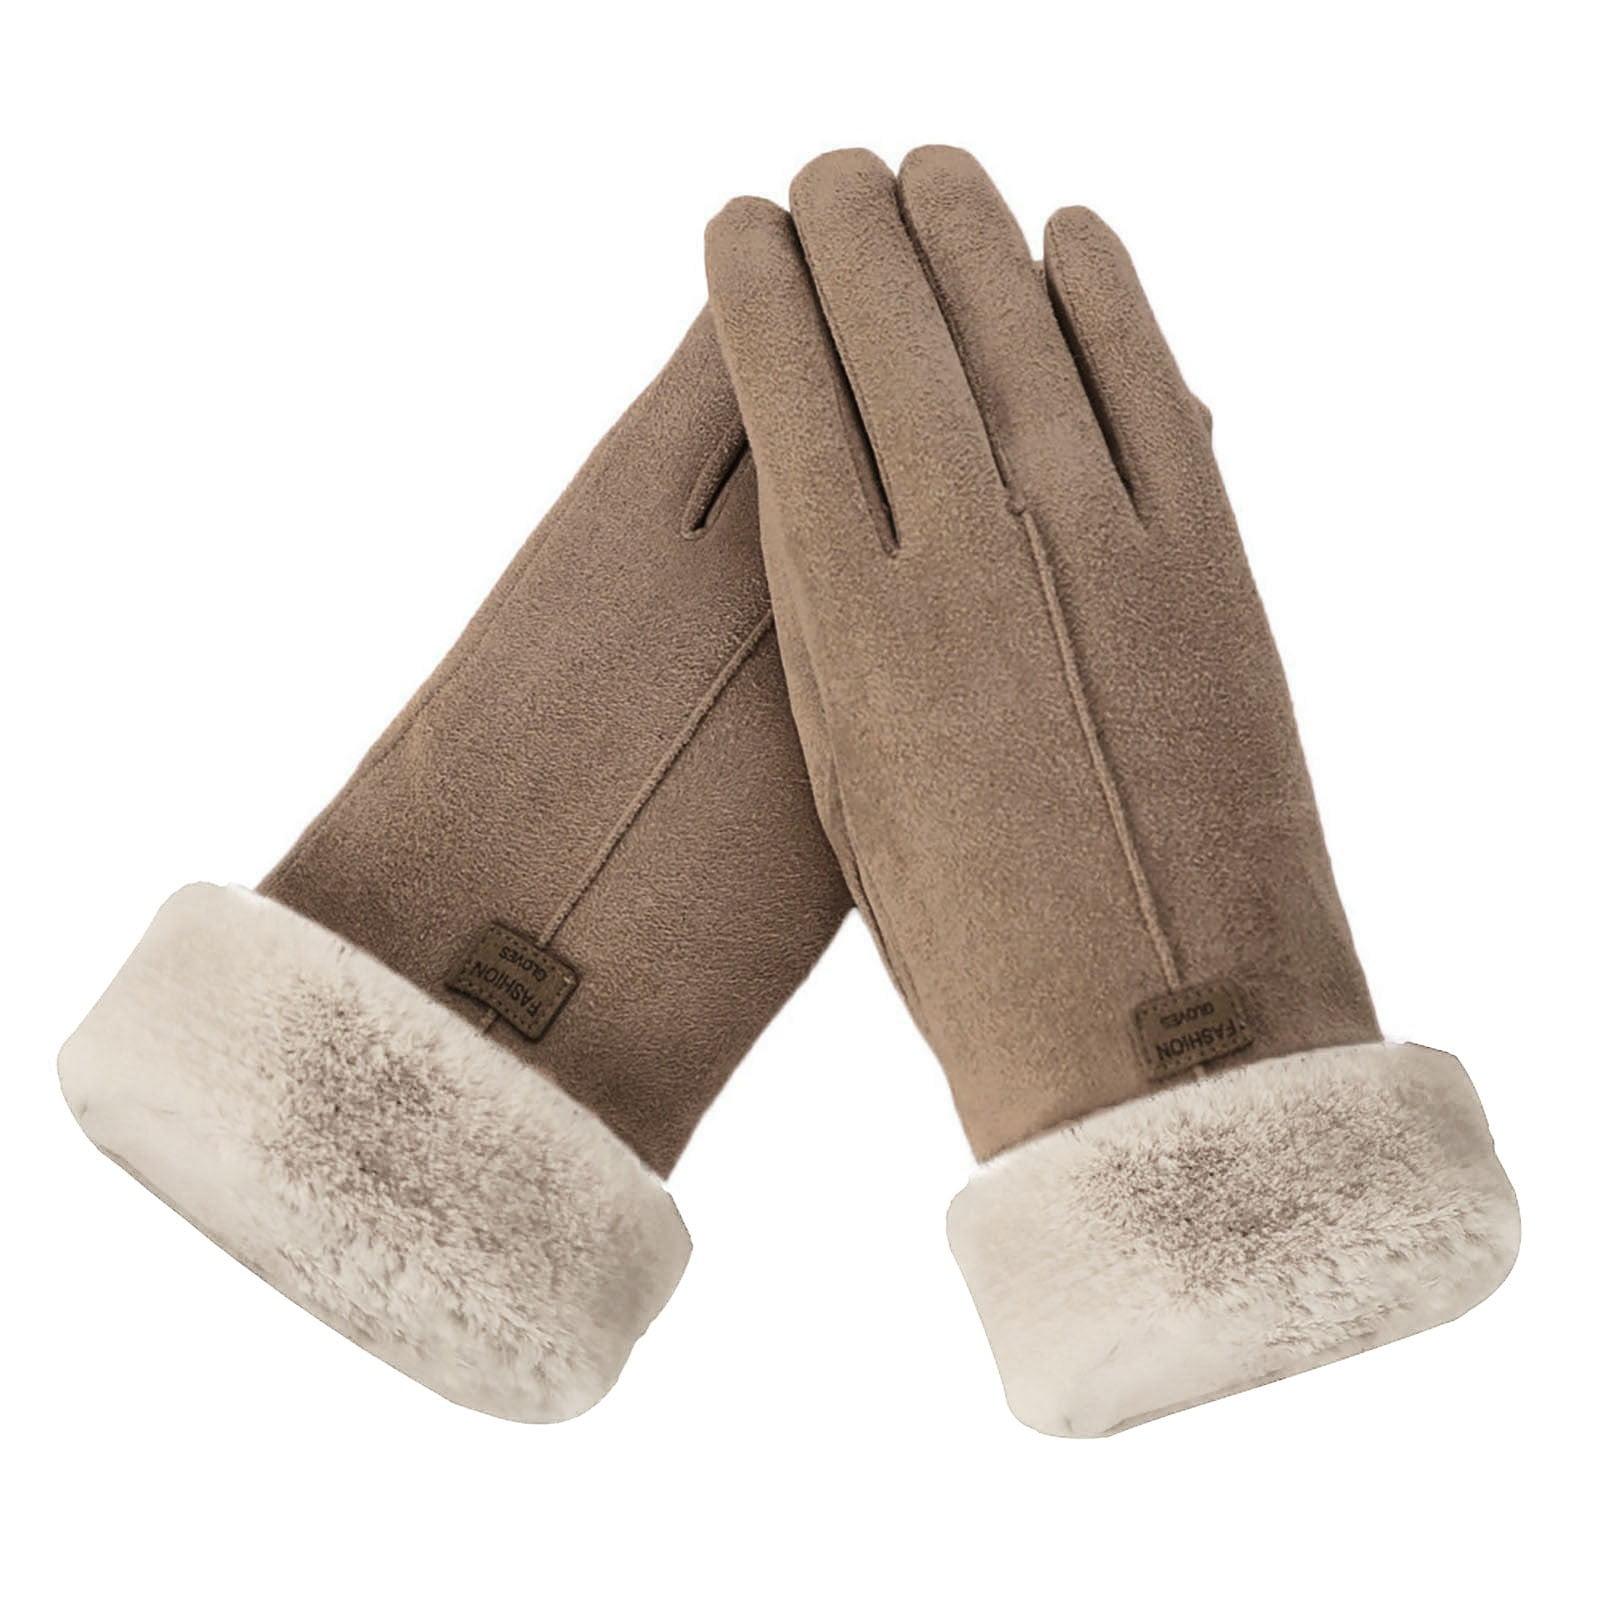 Winter Warm Bowknot Ladies Driving Gloves For Women Fashionable And  Comfortable Driving Mittens From Paizhao, $11.85